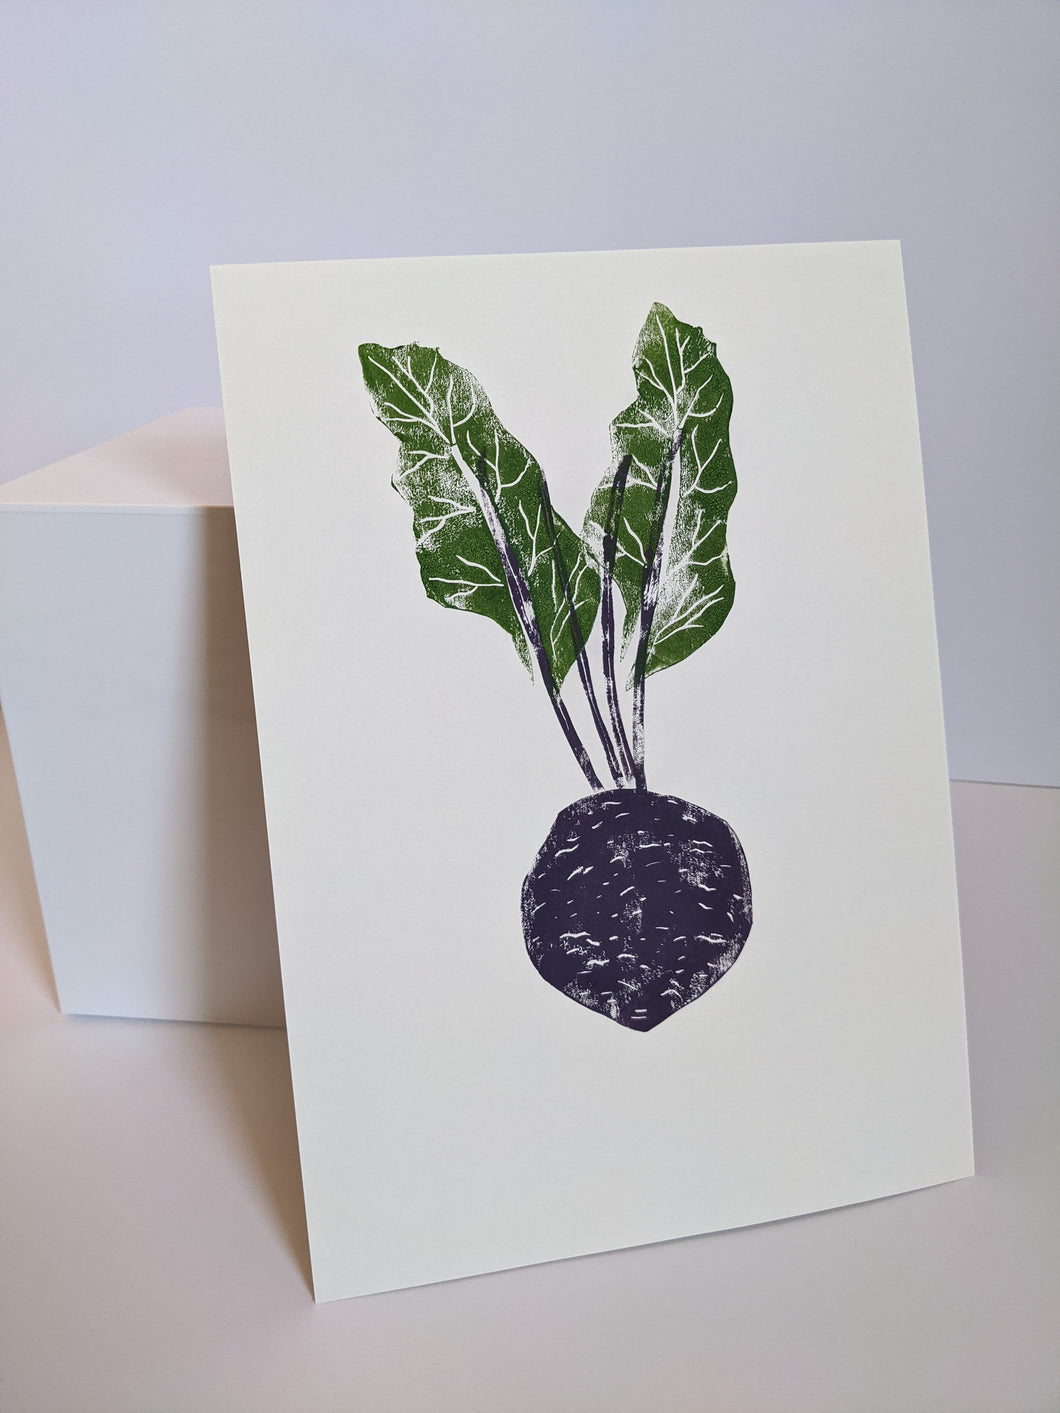 A purple beetroot print with green leaves